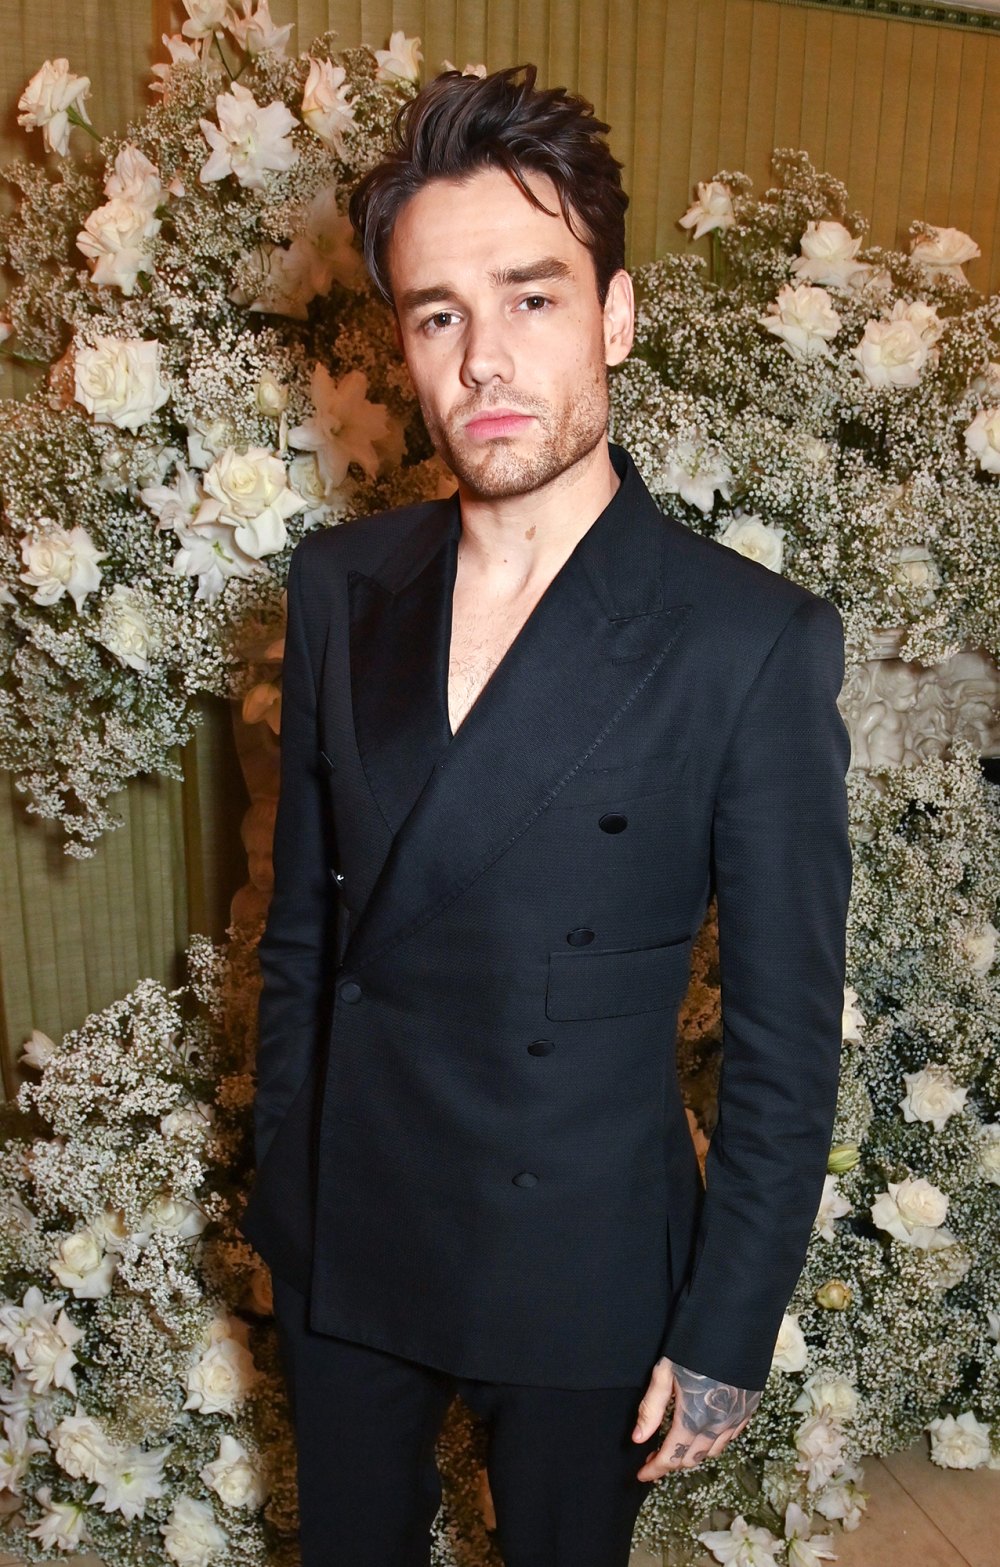 Liam Payne’s Girlfriend Kate Cassidy Says He’s ‘Doing So Much Better’ After ‘Serious’ Kidney Infection